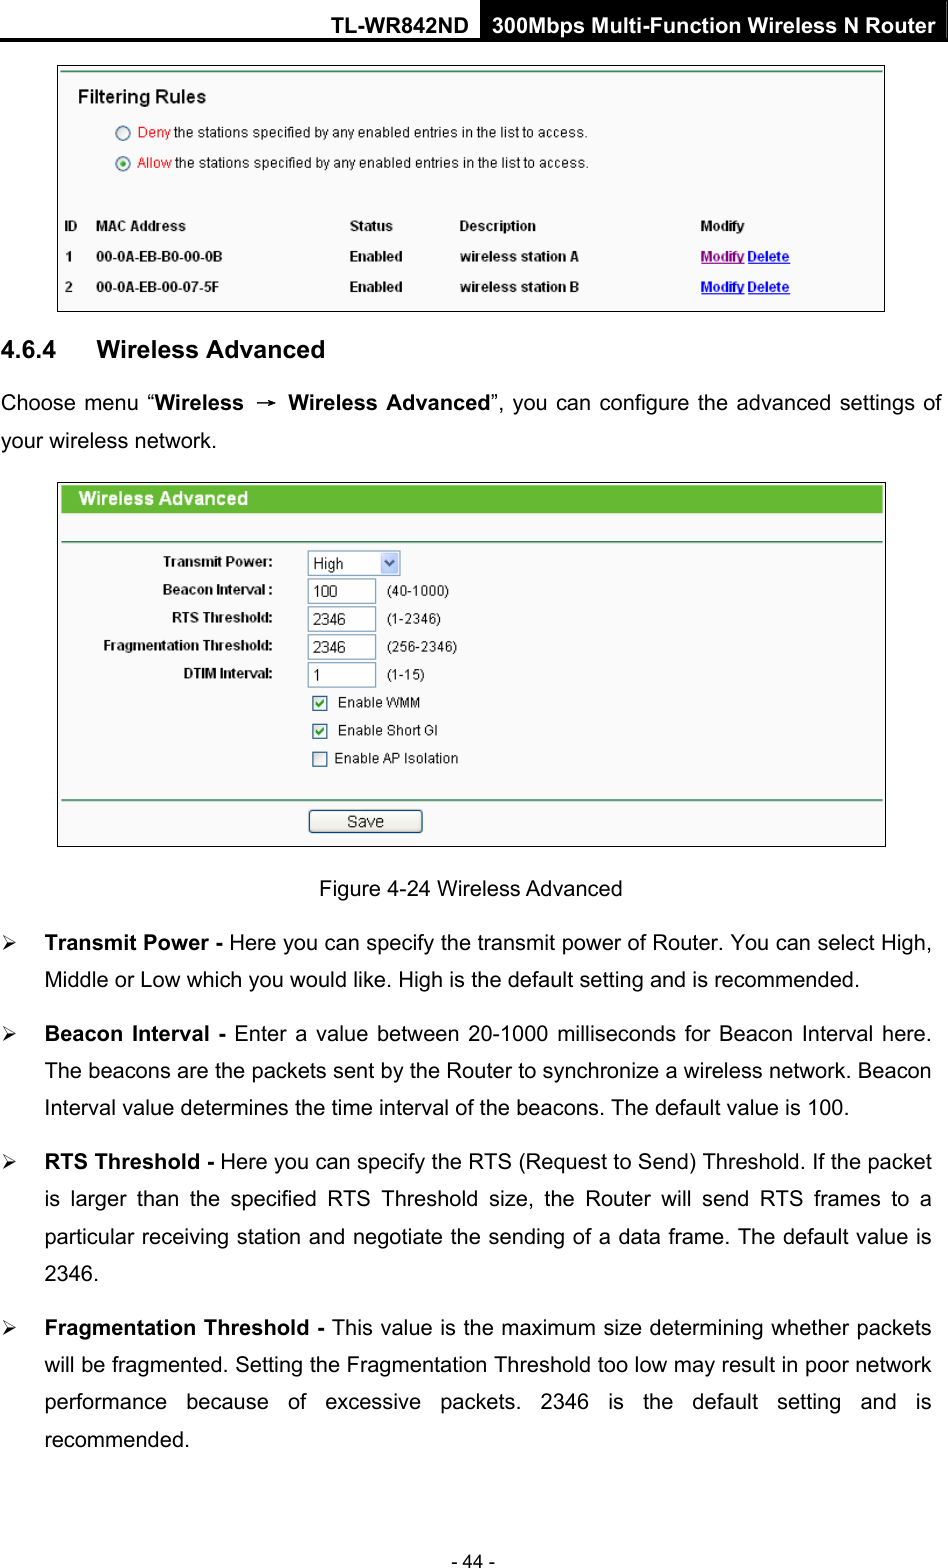 TL-WR842ND 300Mbps Multi-Function Wireless N Router - 44 -  4.6.4  Wireless Advanced Choose menu “Wireless  → Wireless Advanced”, you can configure the advanced settings of your wireless network.  Figure 4-24 Wireless Advanced ¾ Transmit Power - Here you can specify the transmit power of Router. You can select High, Middle or Low which you would like. High is the default setting and is recommended. ¾ Beacon Interval - Enter a value between 20-1000 milliseconds for Beacon Interval here. The beacons are the packets sent by the Router to synchronize a wireless network. Beacon Interval value determines the time interval of the beacons. The default value is 100.   ¾ RTS Threshold - Here you can specify the RTS (Request to Send) Threshold. If the packet is larger than the specified RTS Threshold size, the Router will send RTS frames to a particular receiving station and negotiate the sending of a data frame. The default value is 2346.  ¾ Fragmentation Threshold - This value is the maximum size determining whether packets will be fragmented. Setting the Fragmentation Threshold too low may result in poor network performance because of excessive packets. 2346 is the default setting and is recommended.  